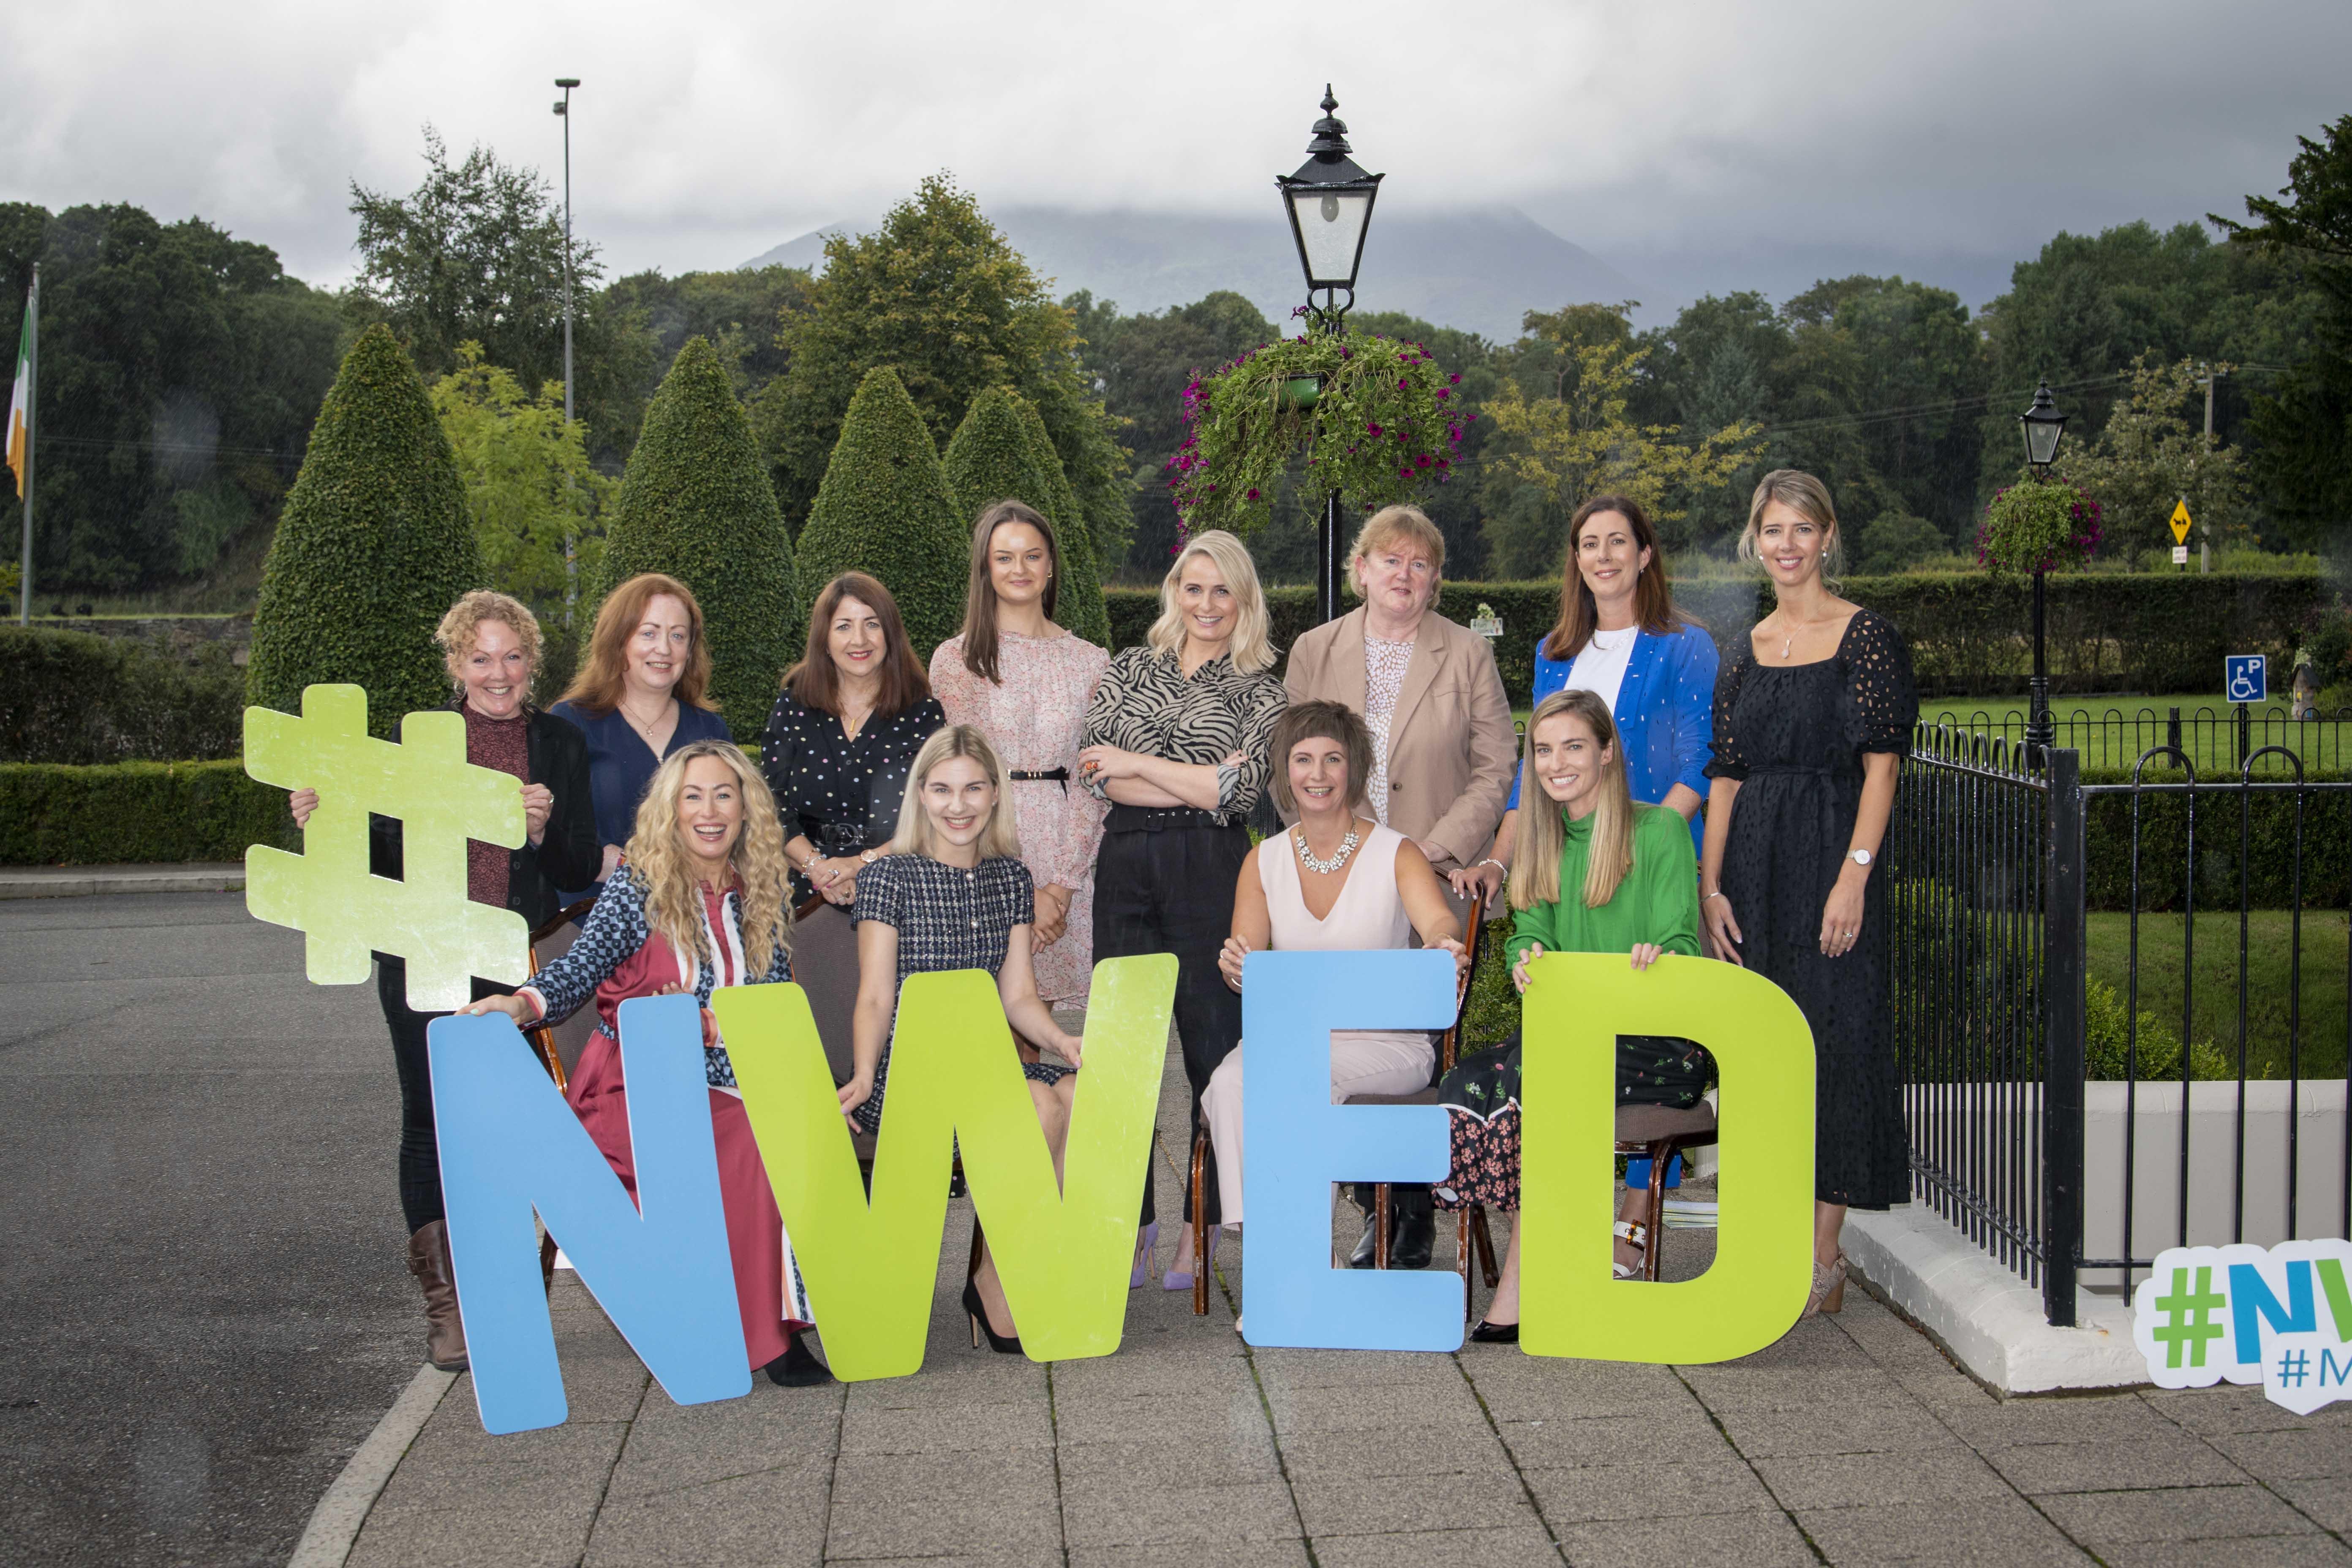 A group photograph of women standing behind and # N W E D sign with trees in the background